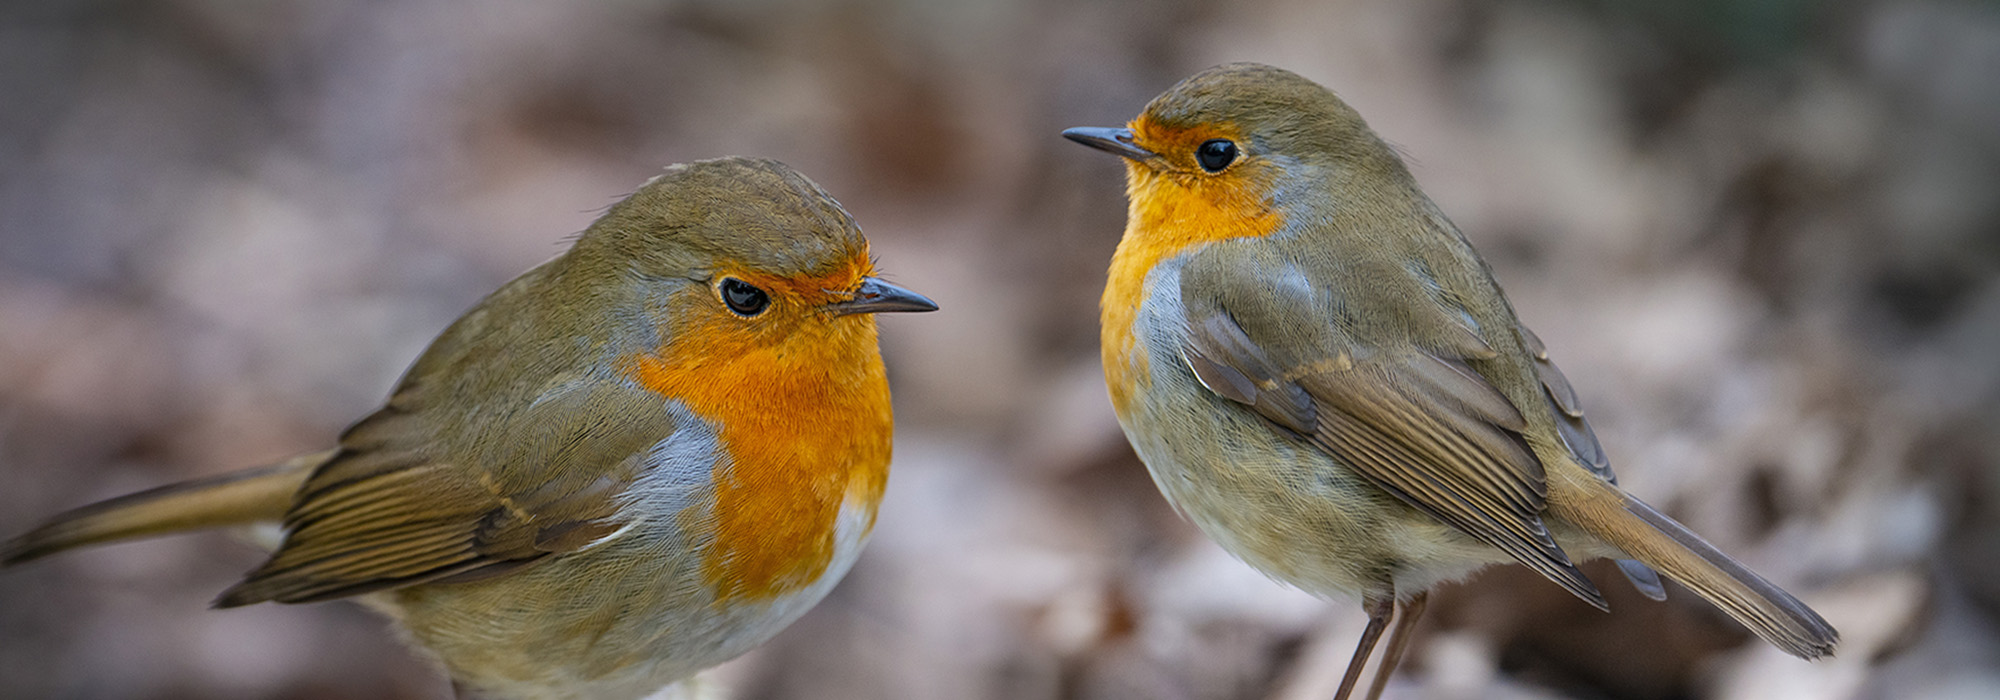 A close-up of two robins